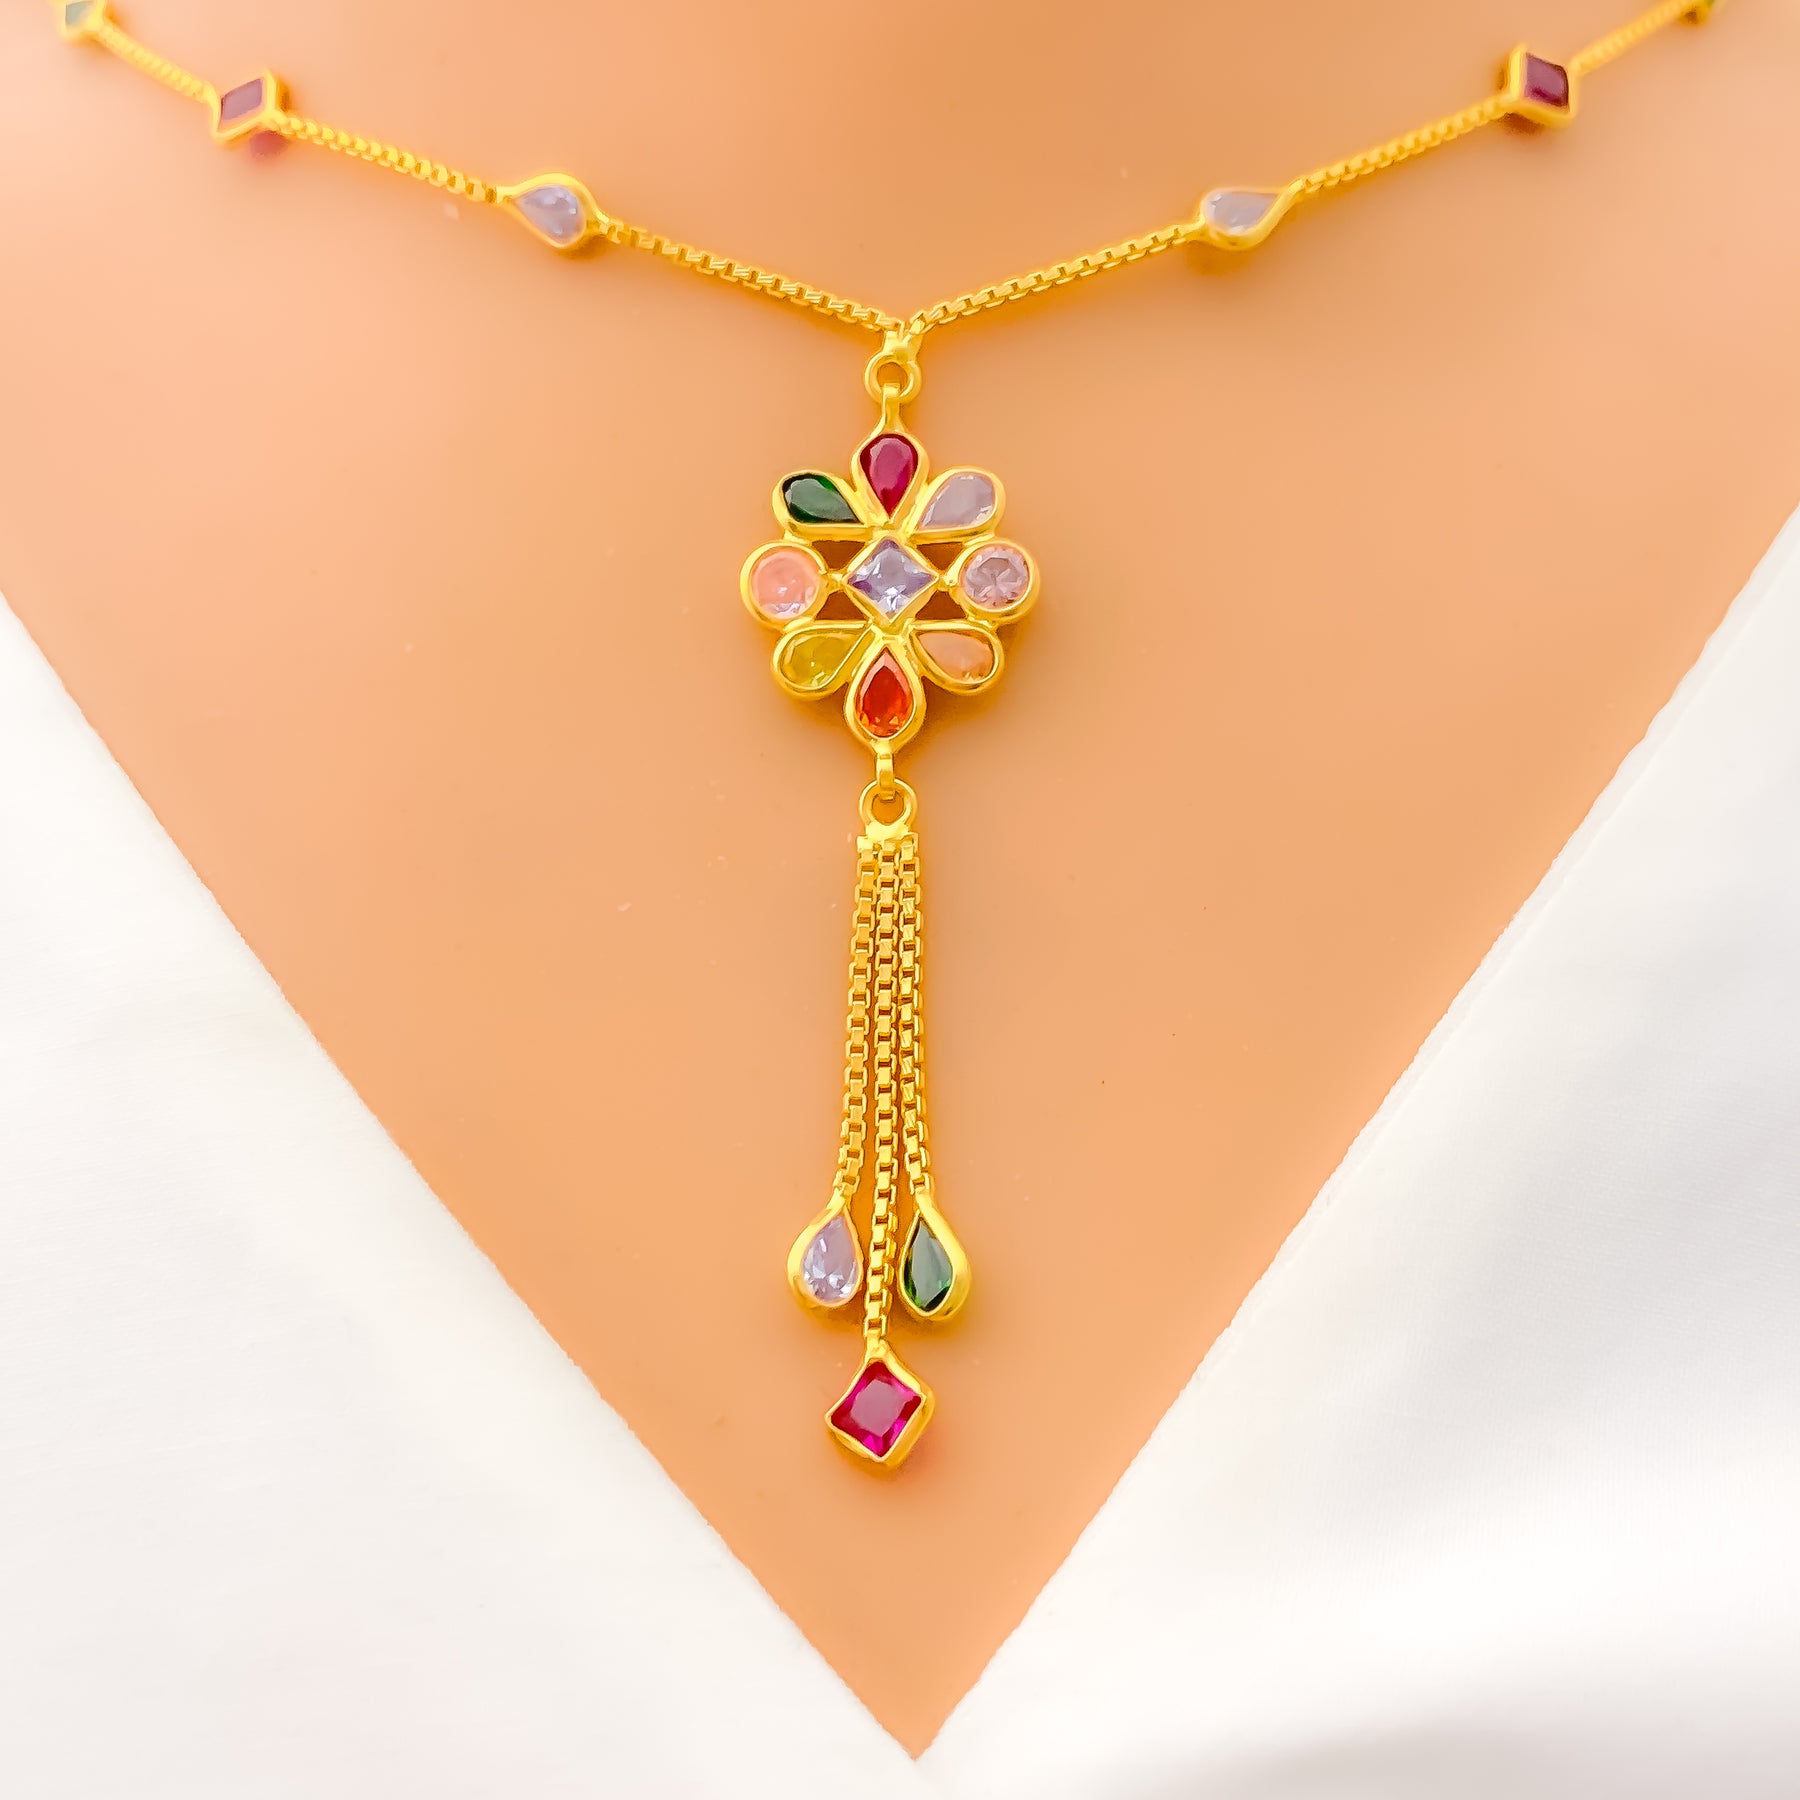 Fancy Hanging Chain 22k Gold Necklace Set – Andaaz Jewelers